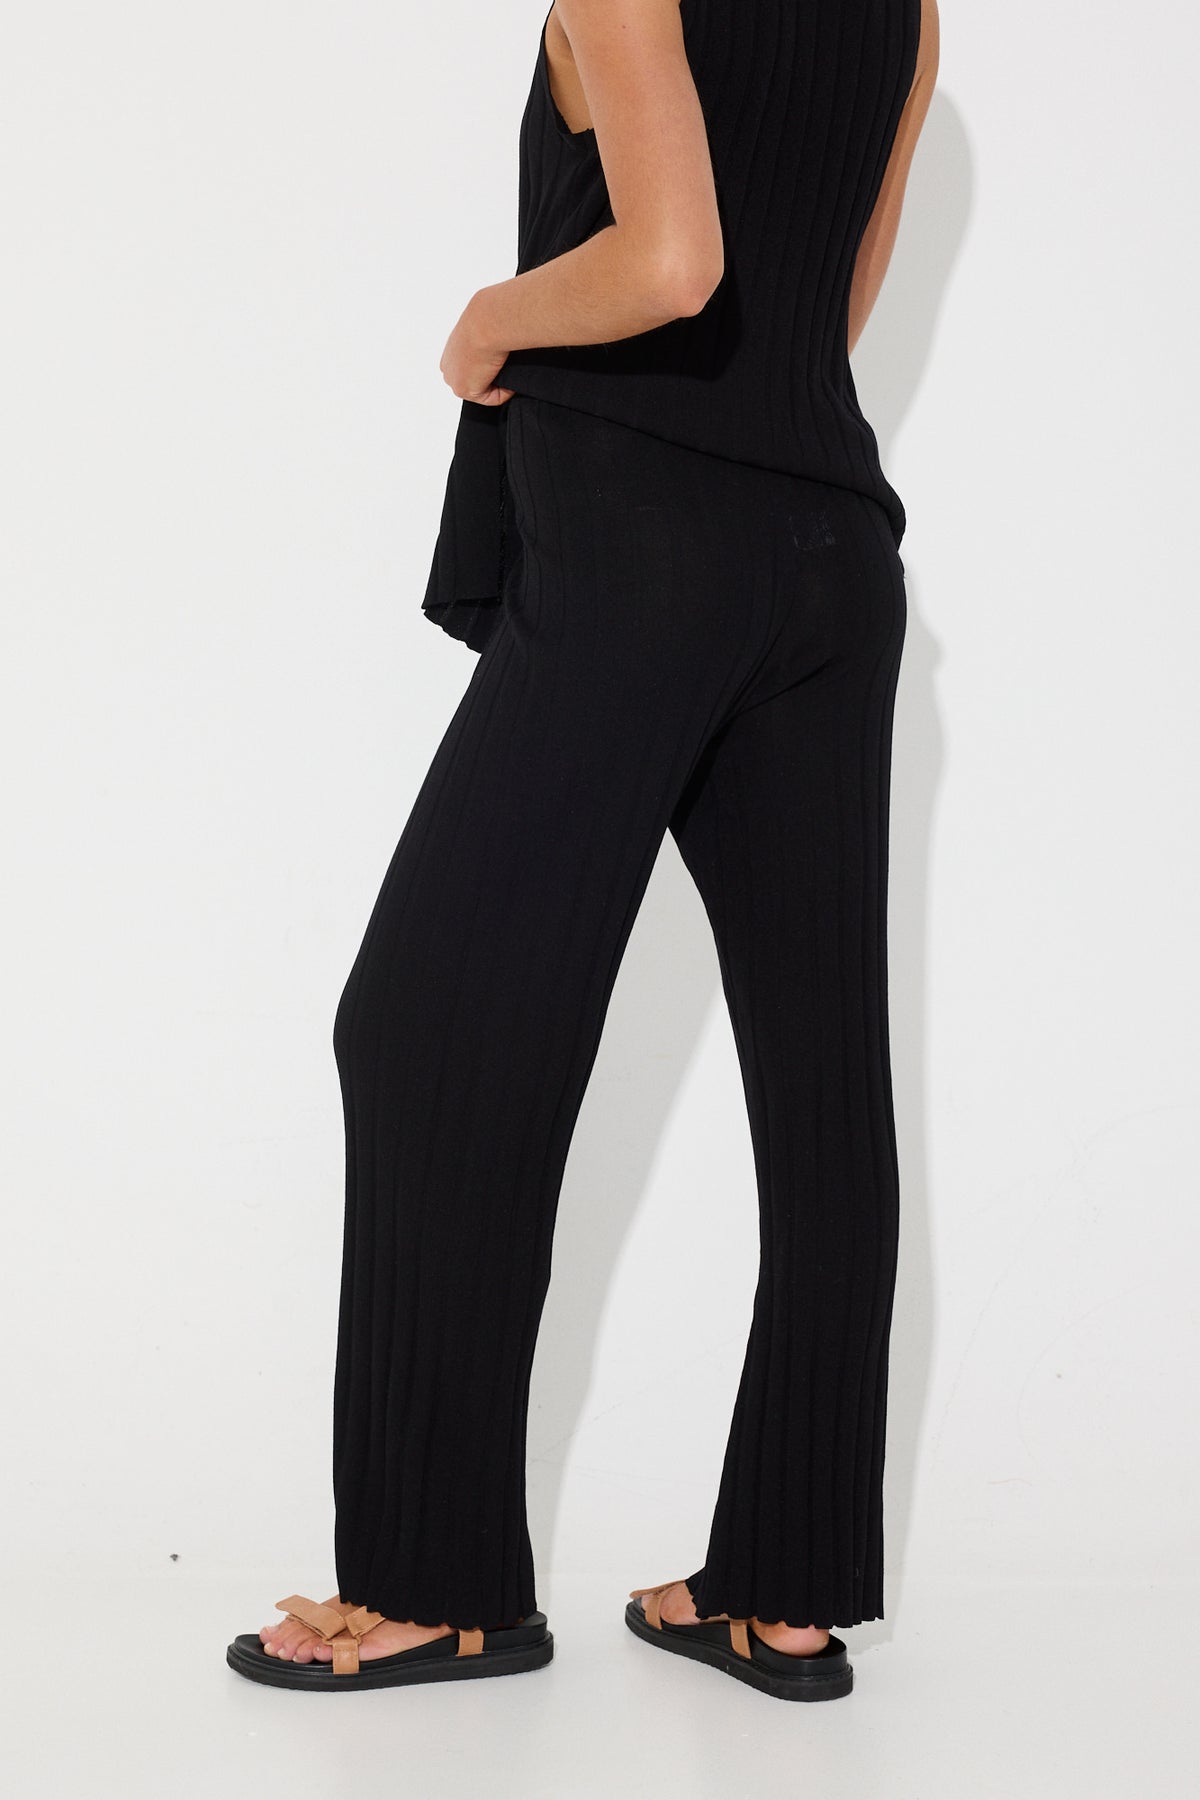 Lucia Ribbed Pant Black